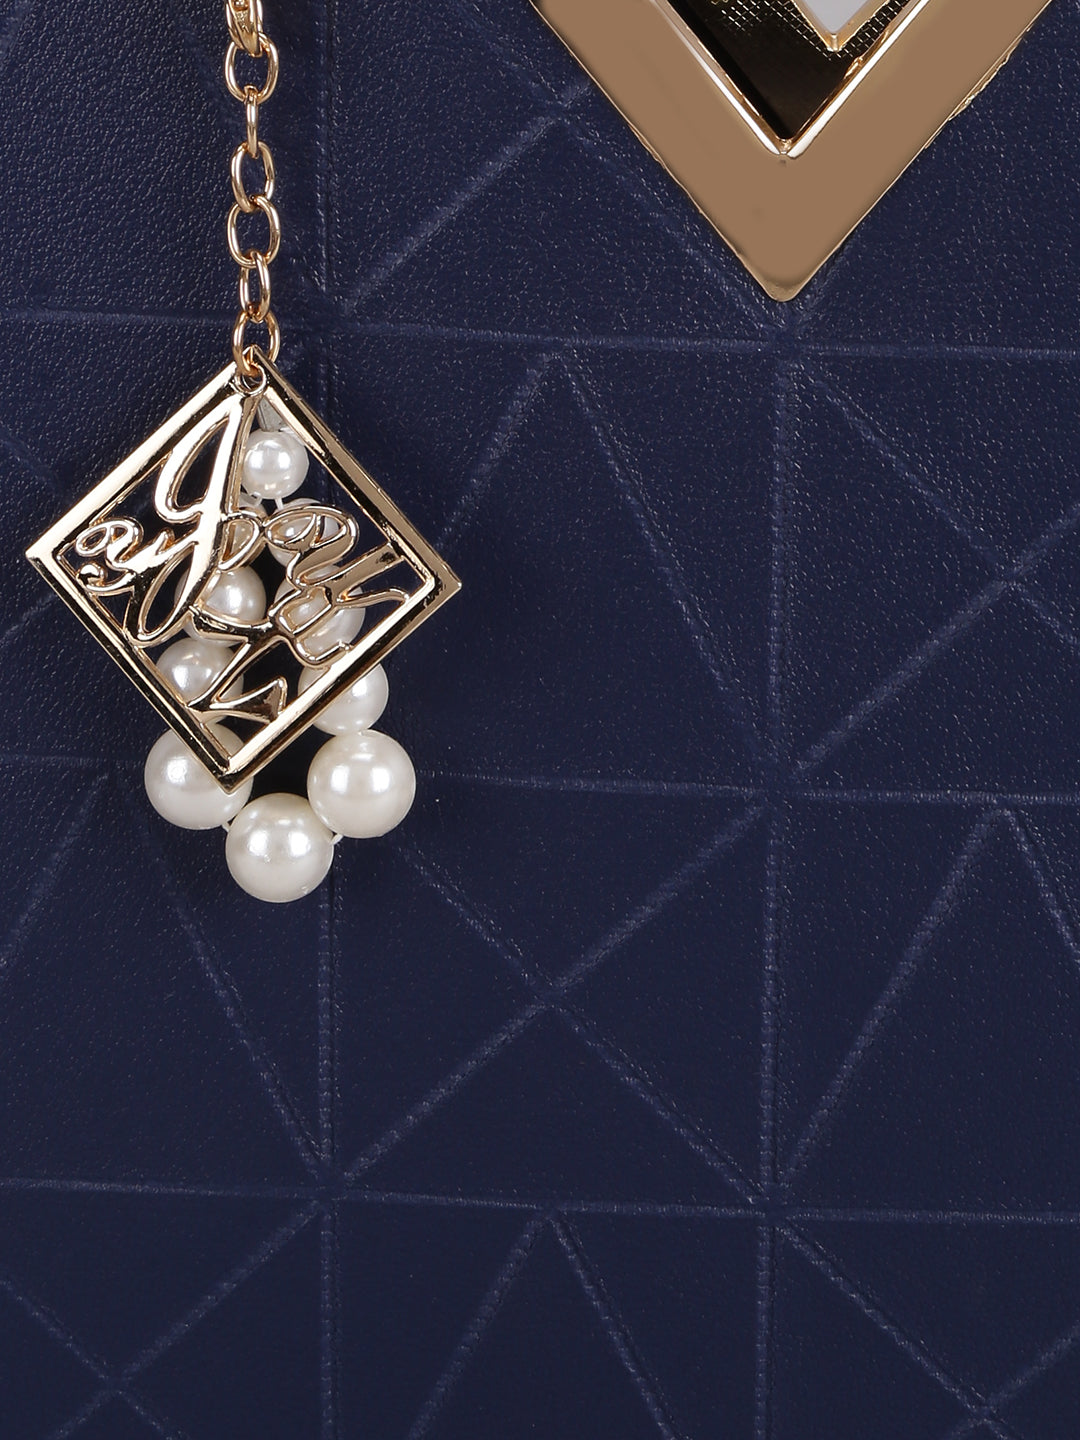 Blue Geometric Embossed Square Bag With Bag Charm